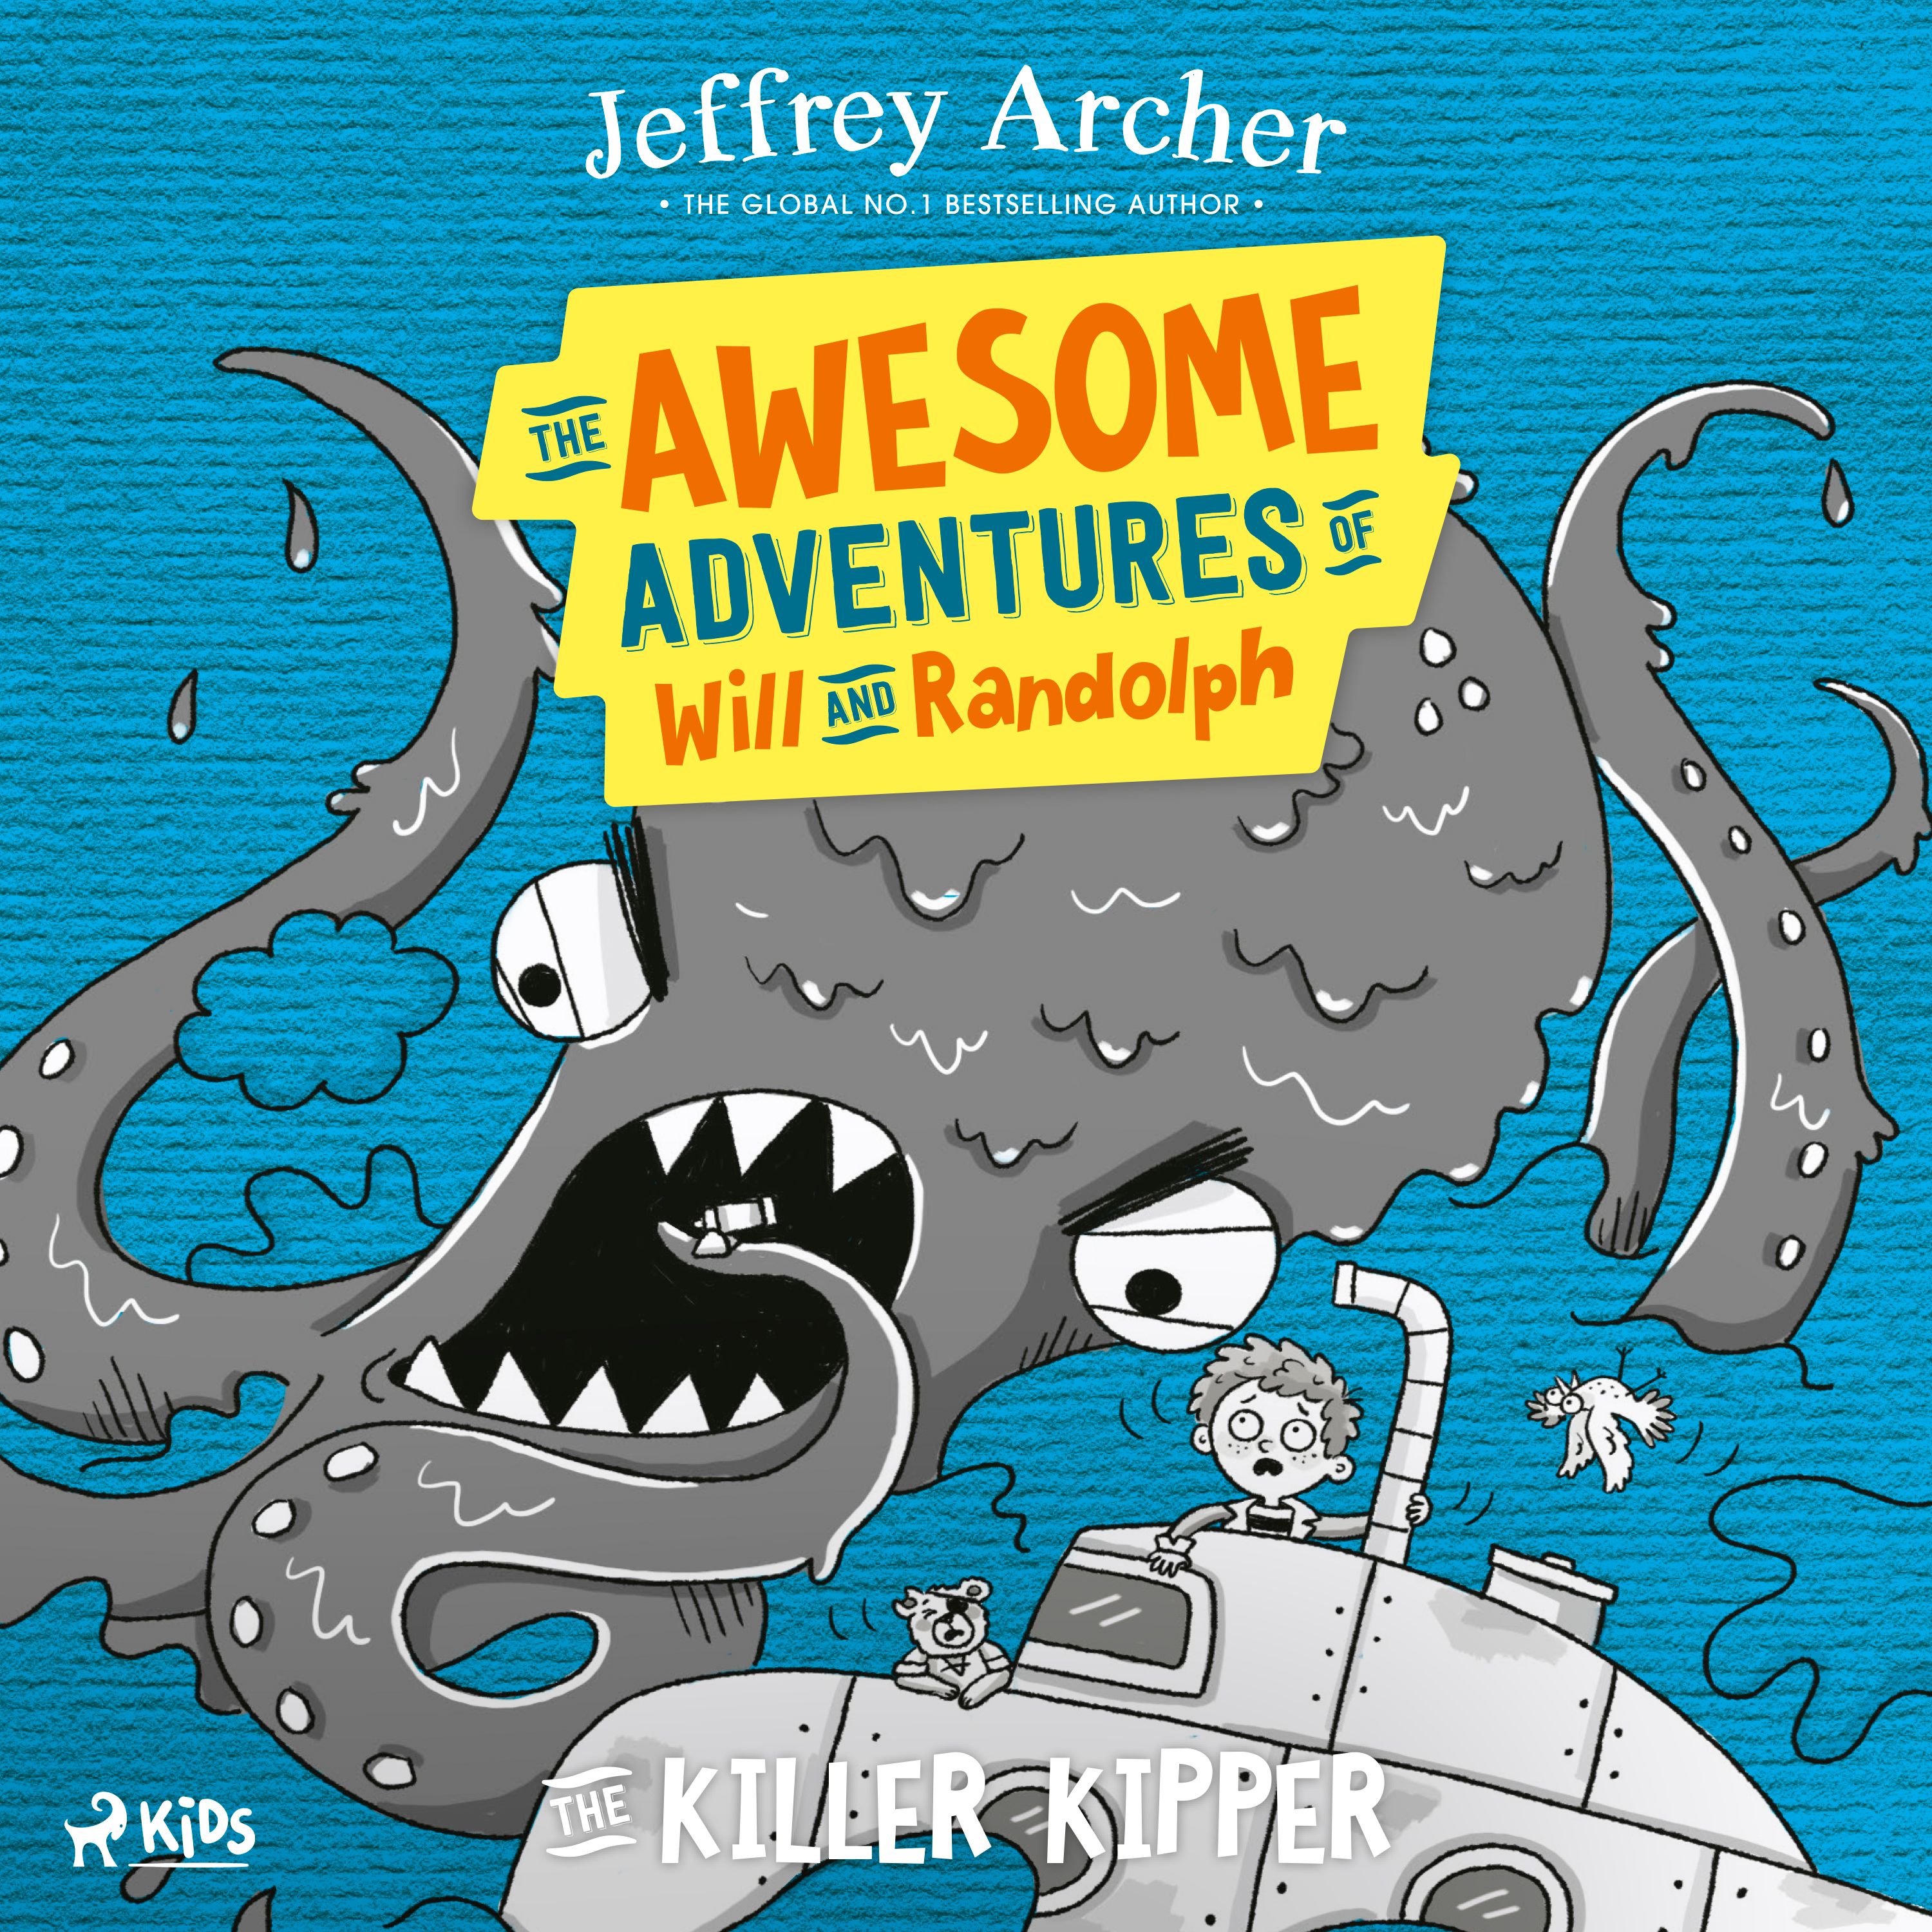 The Awesome Adventures of Will and Randolph: The Killer Kipper, lydbog af Jeffrey Archer